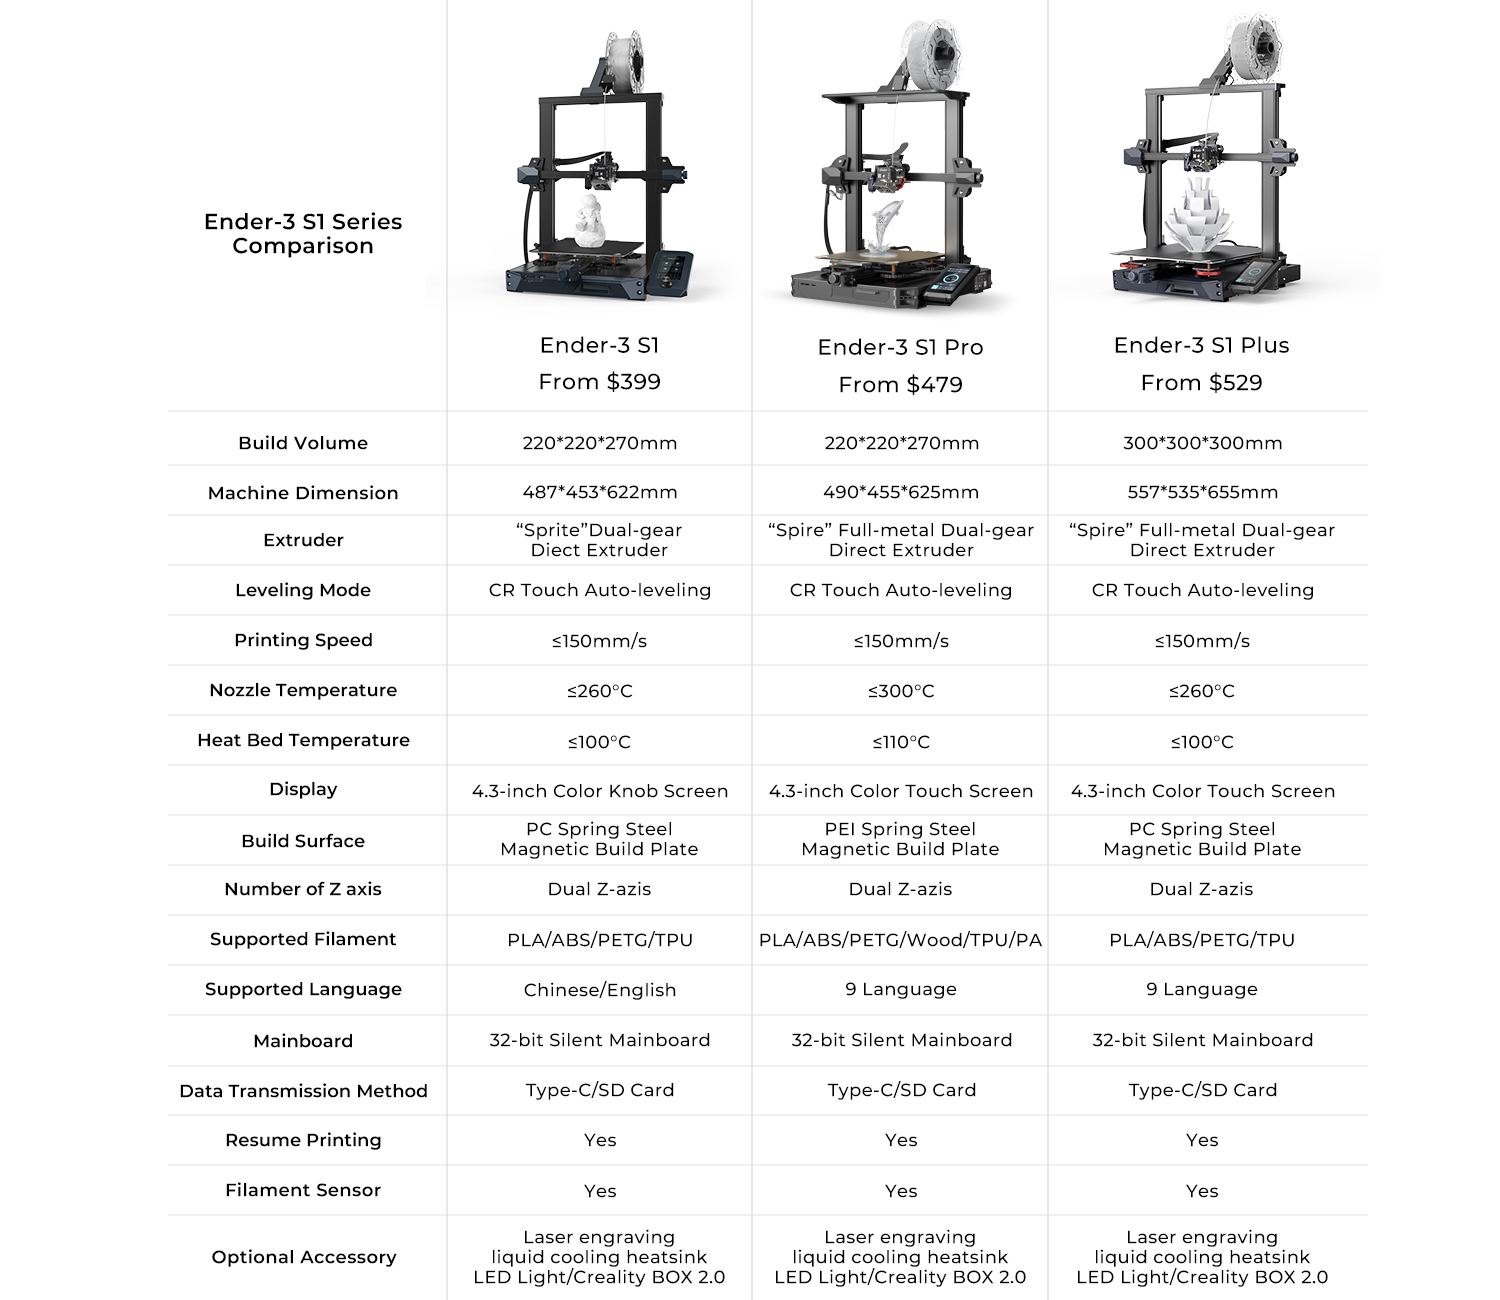 Ender 3 S1 Comparison | Ender-3 Neo, Ender-3 V2 Neo, and Ender-3 Max Neo, which is the right one for you?